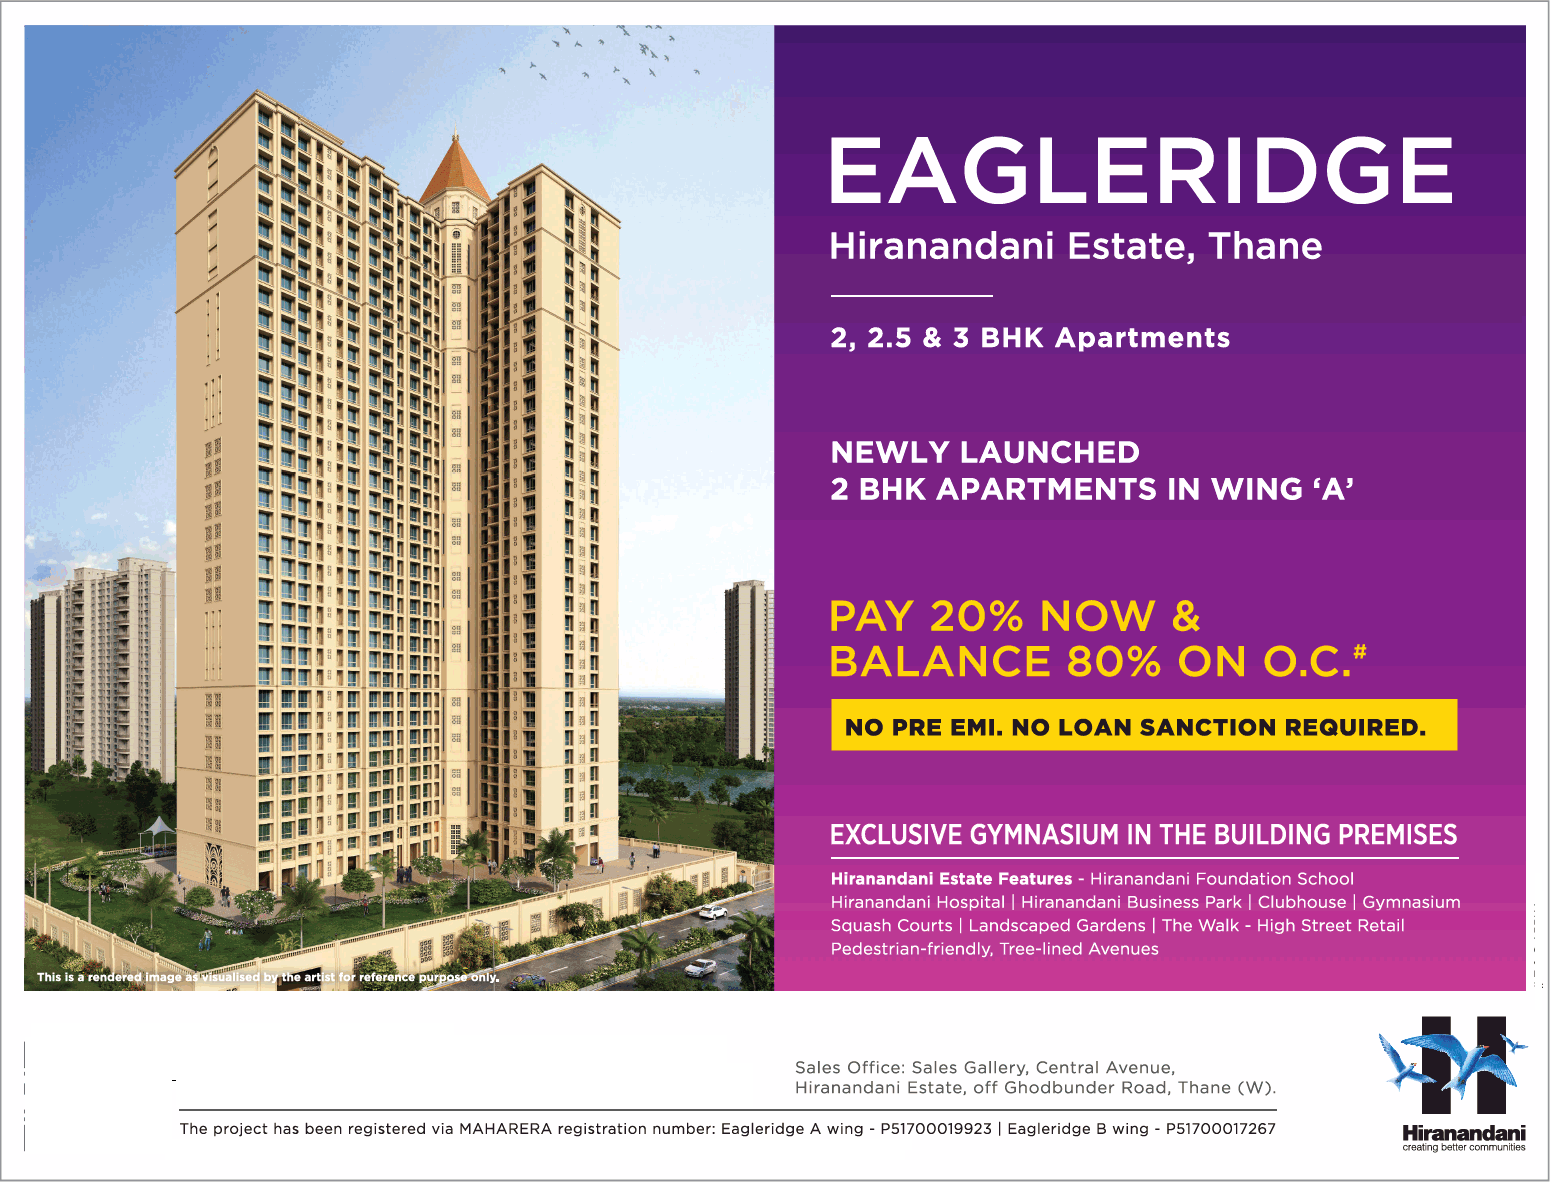 Newly launched 2 BHK apartments in Wing -A by Eagleridge Hiranandani Estate Thane, Mumbai Update